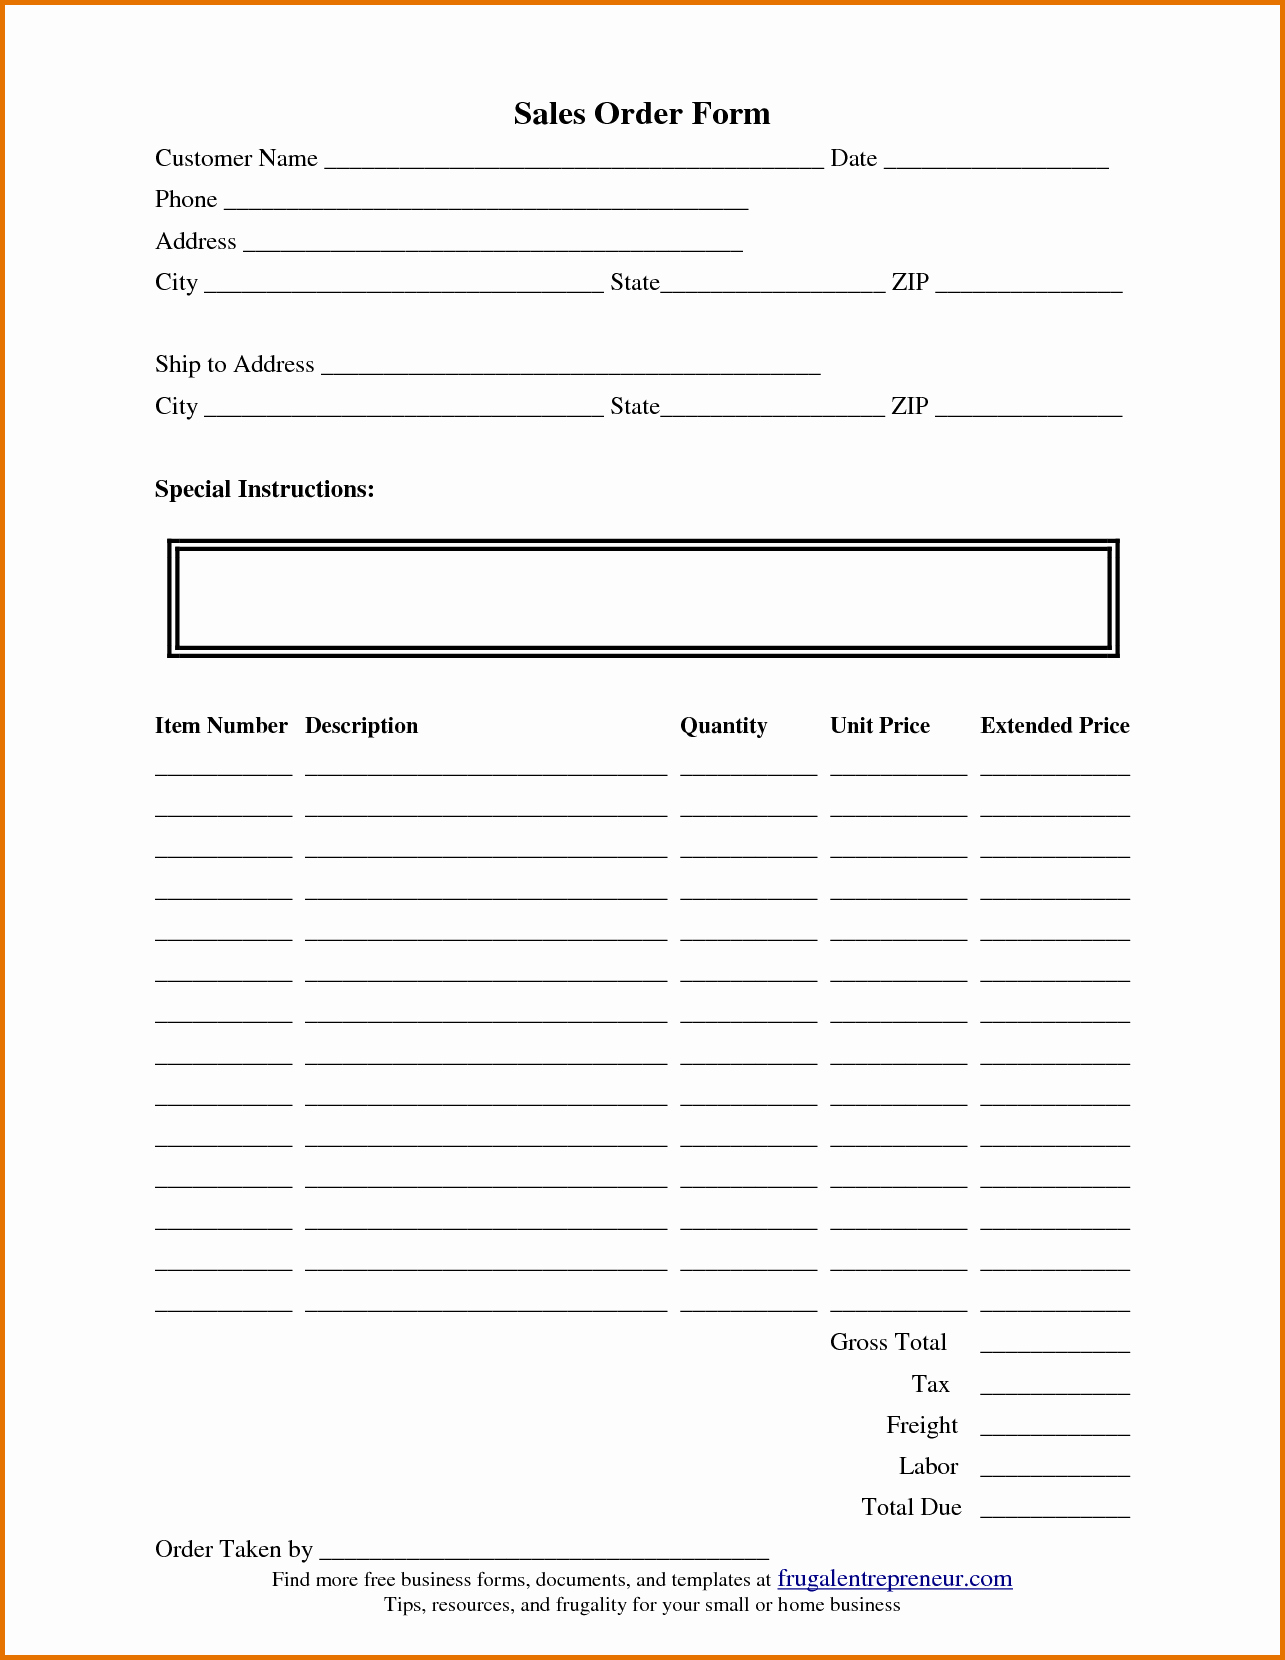 Sales order form Template Free Lovely 8 order form Template Freereference Letters Words